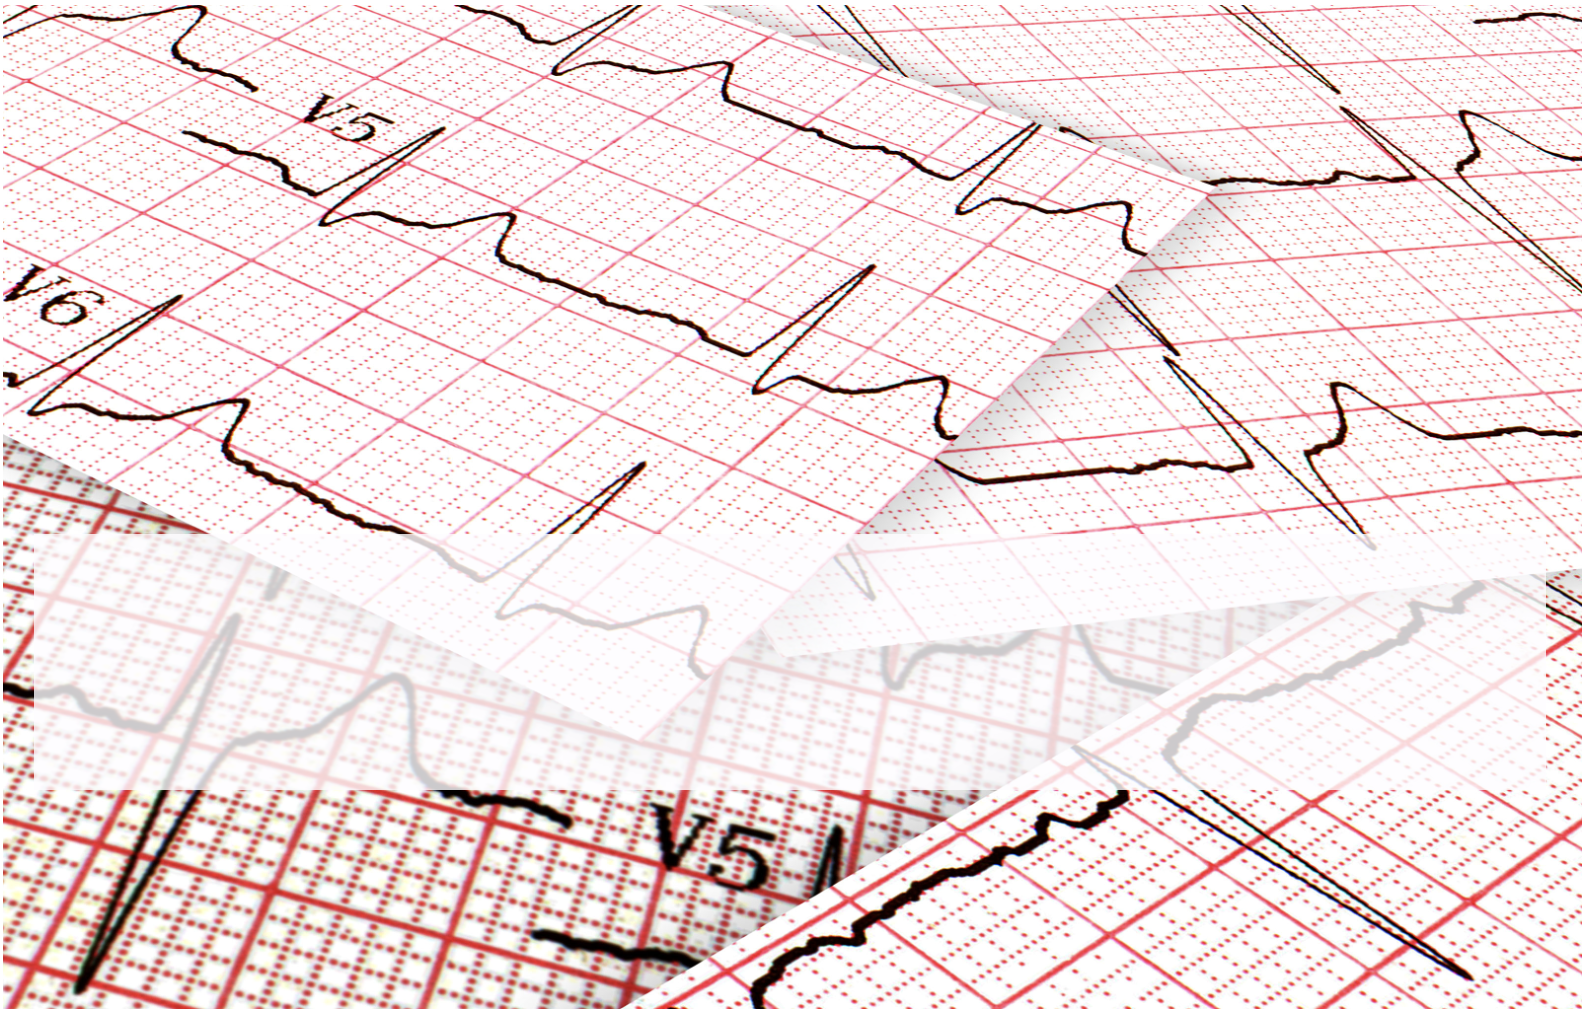 WHAT IF WE COULD PREDICT BY EVOLVING ECG CHANGES WHO WAS GOING TO ARREST?